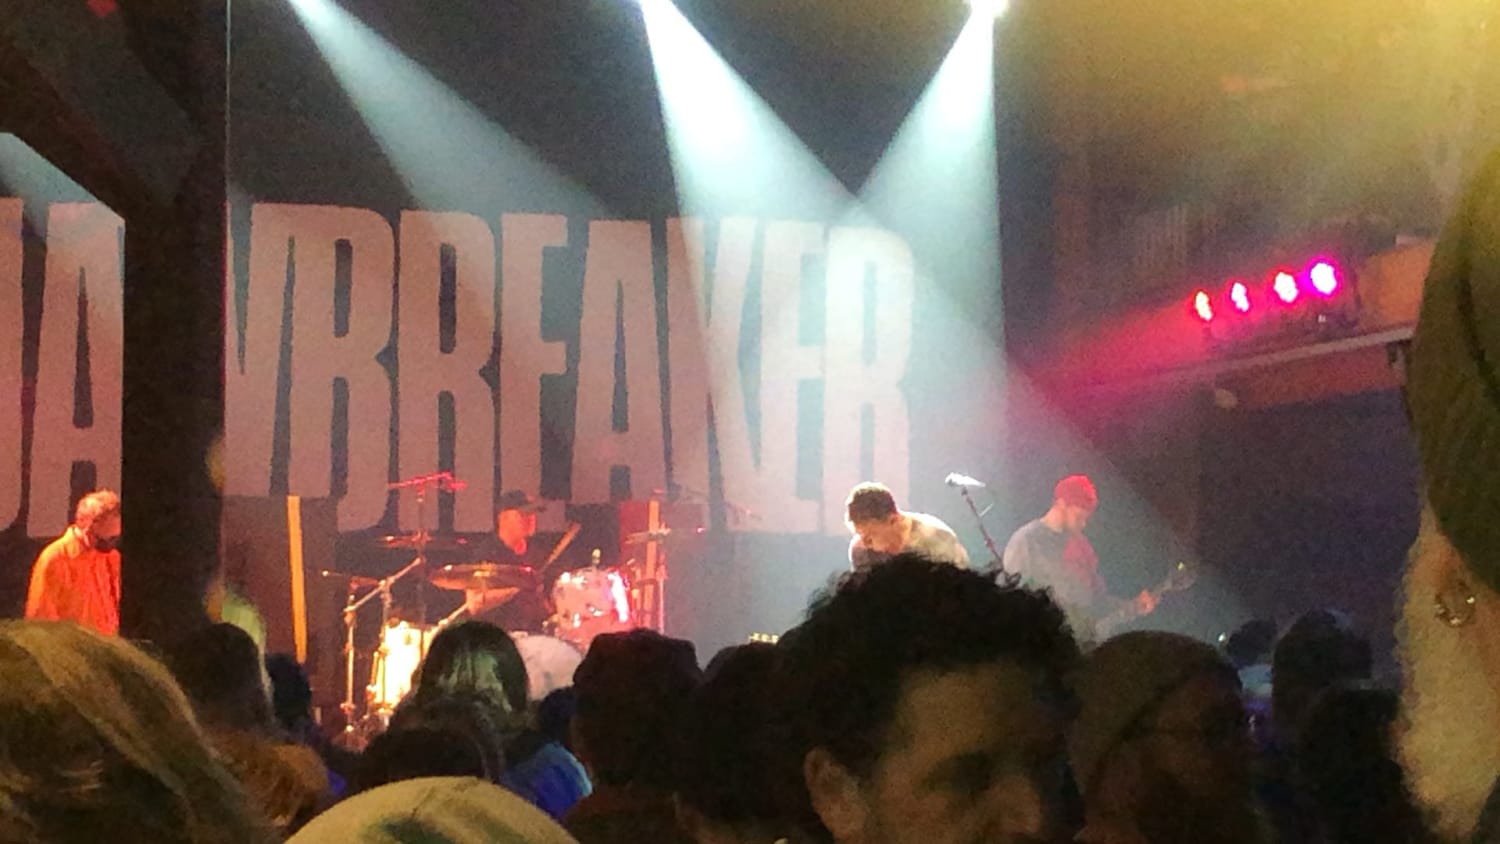 Jawbreaker in Michigan, they ended with this banger, their whole set was absolutely fantastic. I’m sad, though I’ve been into punk for almost 25 years (traditionally), that I just got into these guys over the last few of them. But so happy that I got to see them.